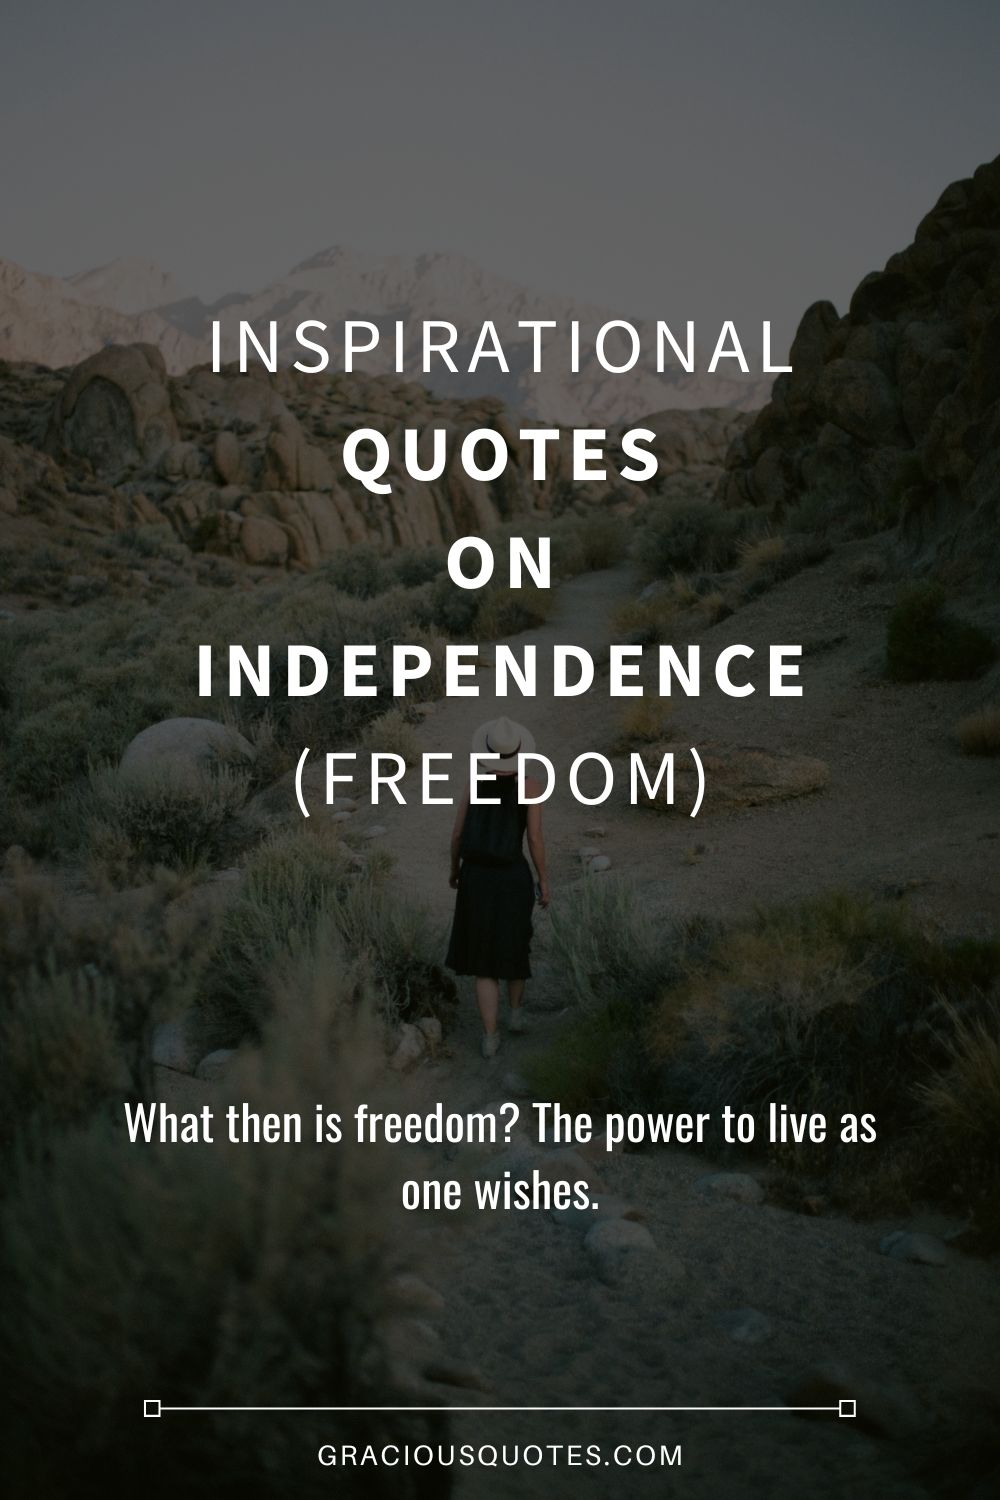 Inspirational Quotes on Independence (FREEDOM) - Gracious Quotes